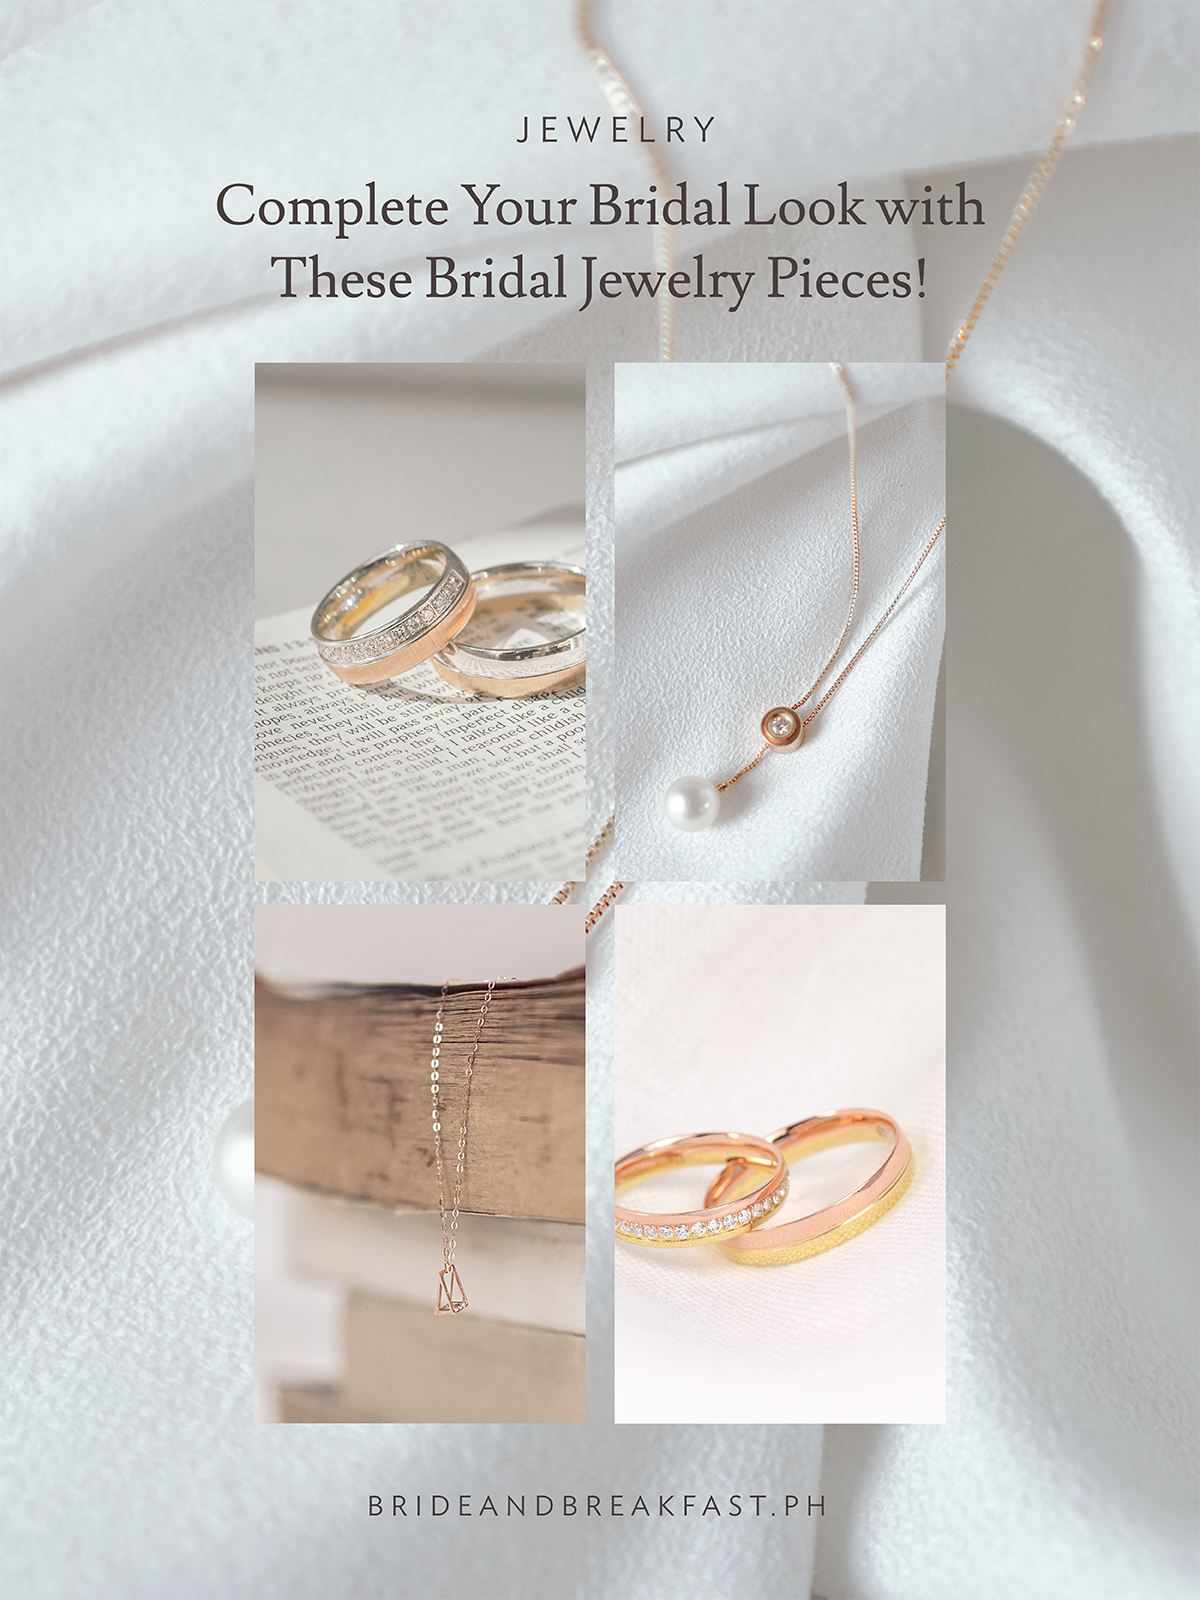 Complete Your Bridal Look with These Bridal Jewelry Pieces!